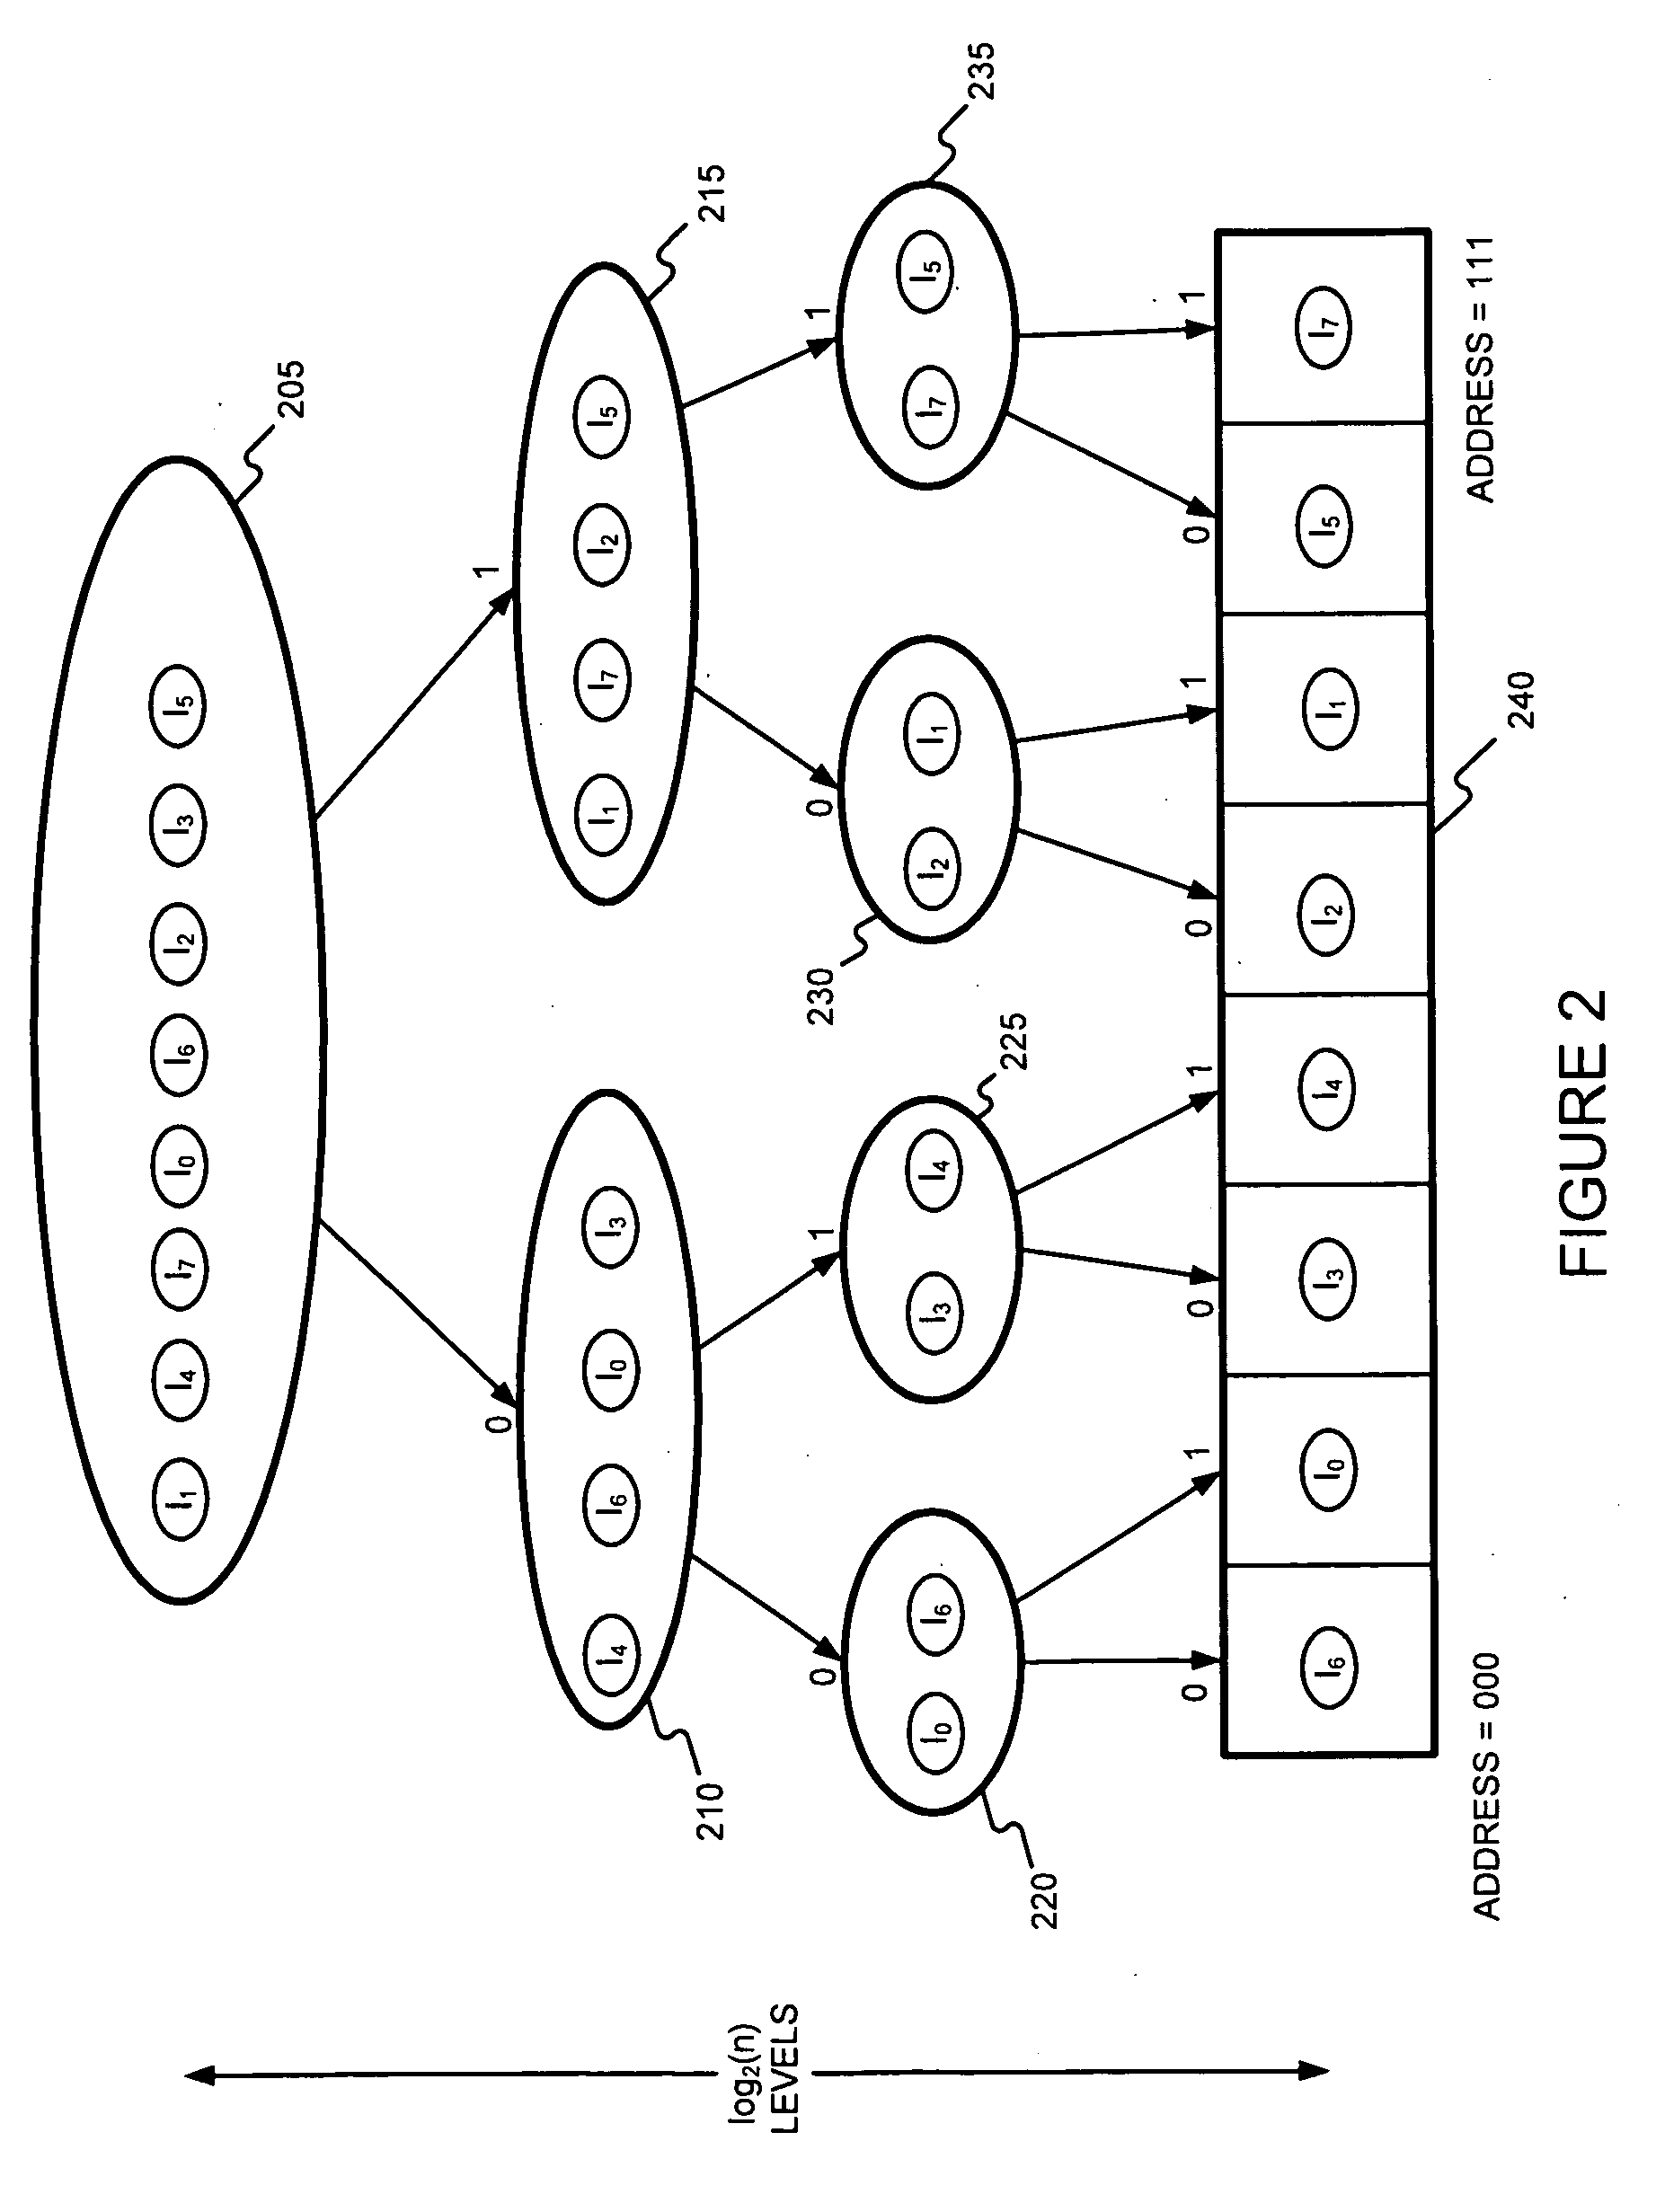 Generating a  boundary hash-based hierarchical data structure associated with a plurality of known arbitrary-length bit strings and using the generated hierarchical data structure for detecting whether an arbitrary-length bit string input matches one of a plurality of known arbitrary-length bit strings